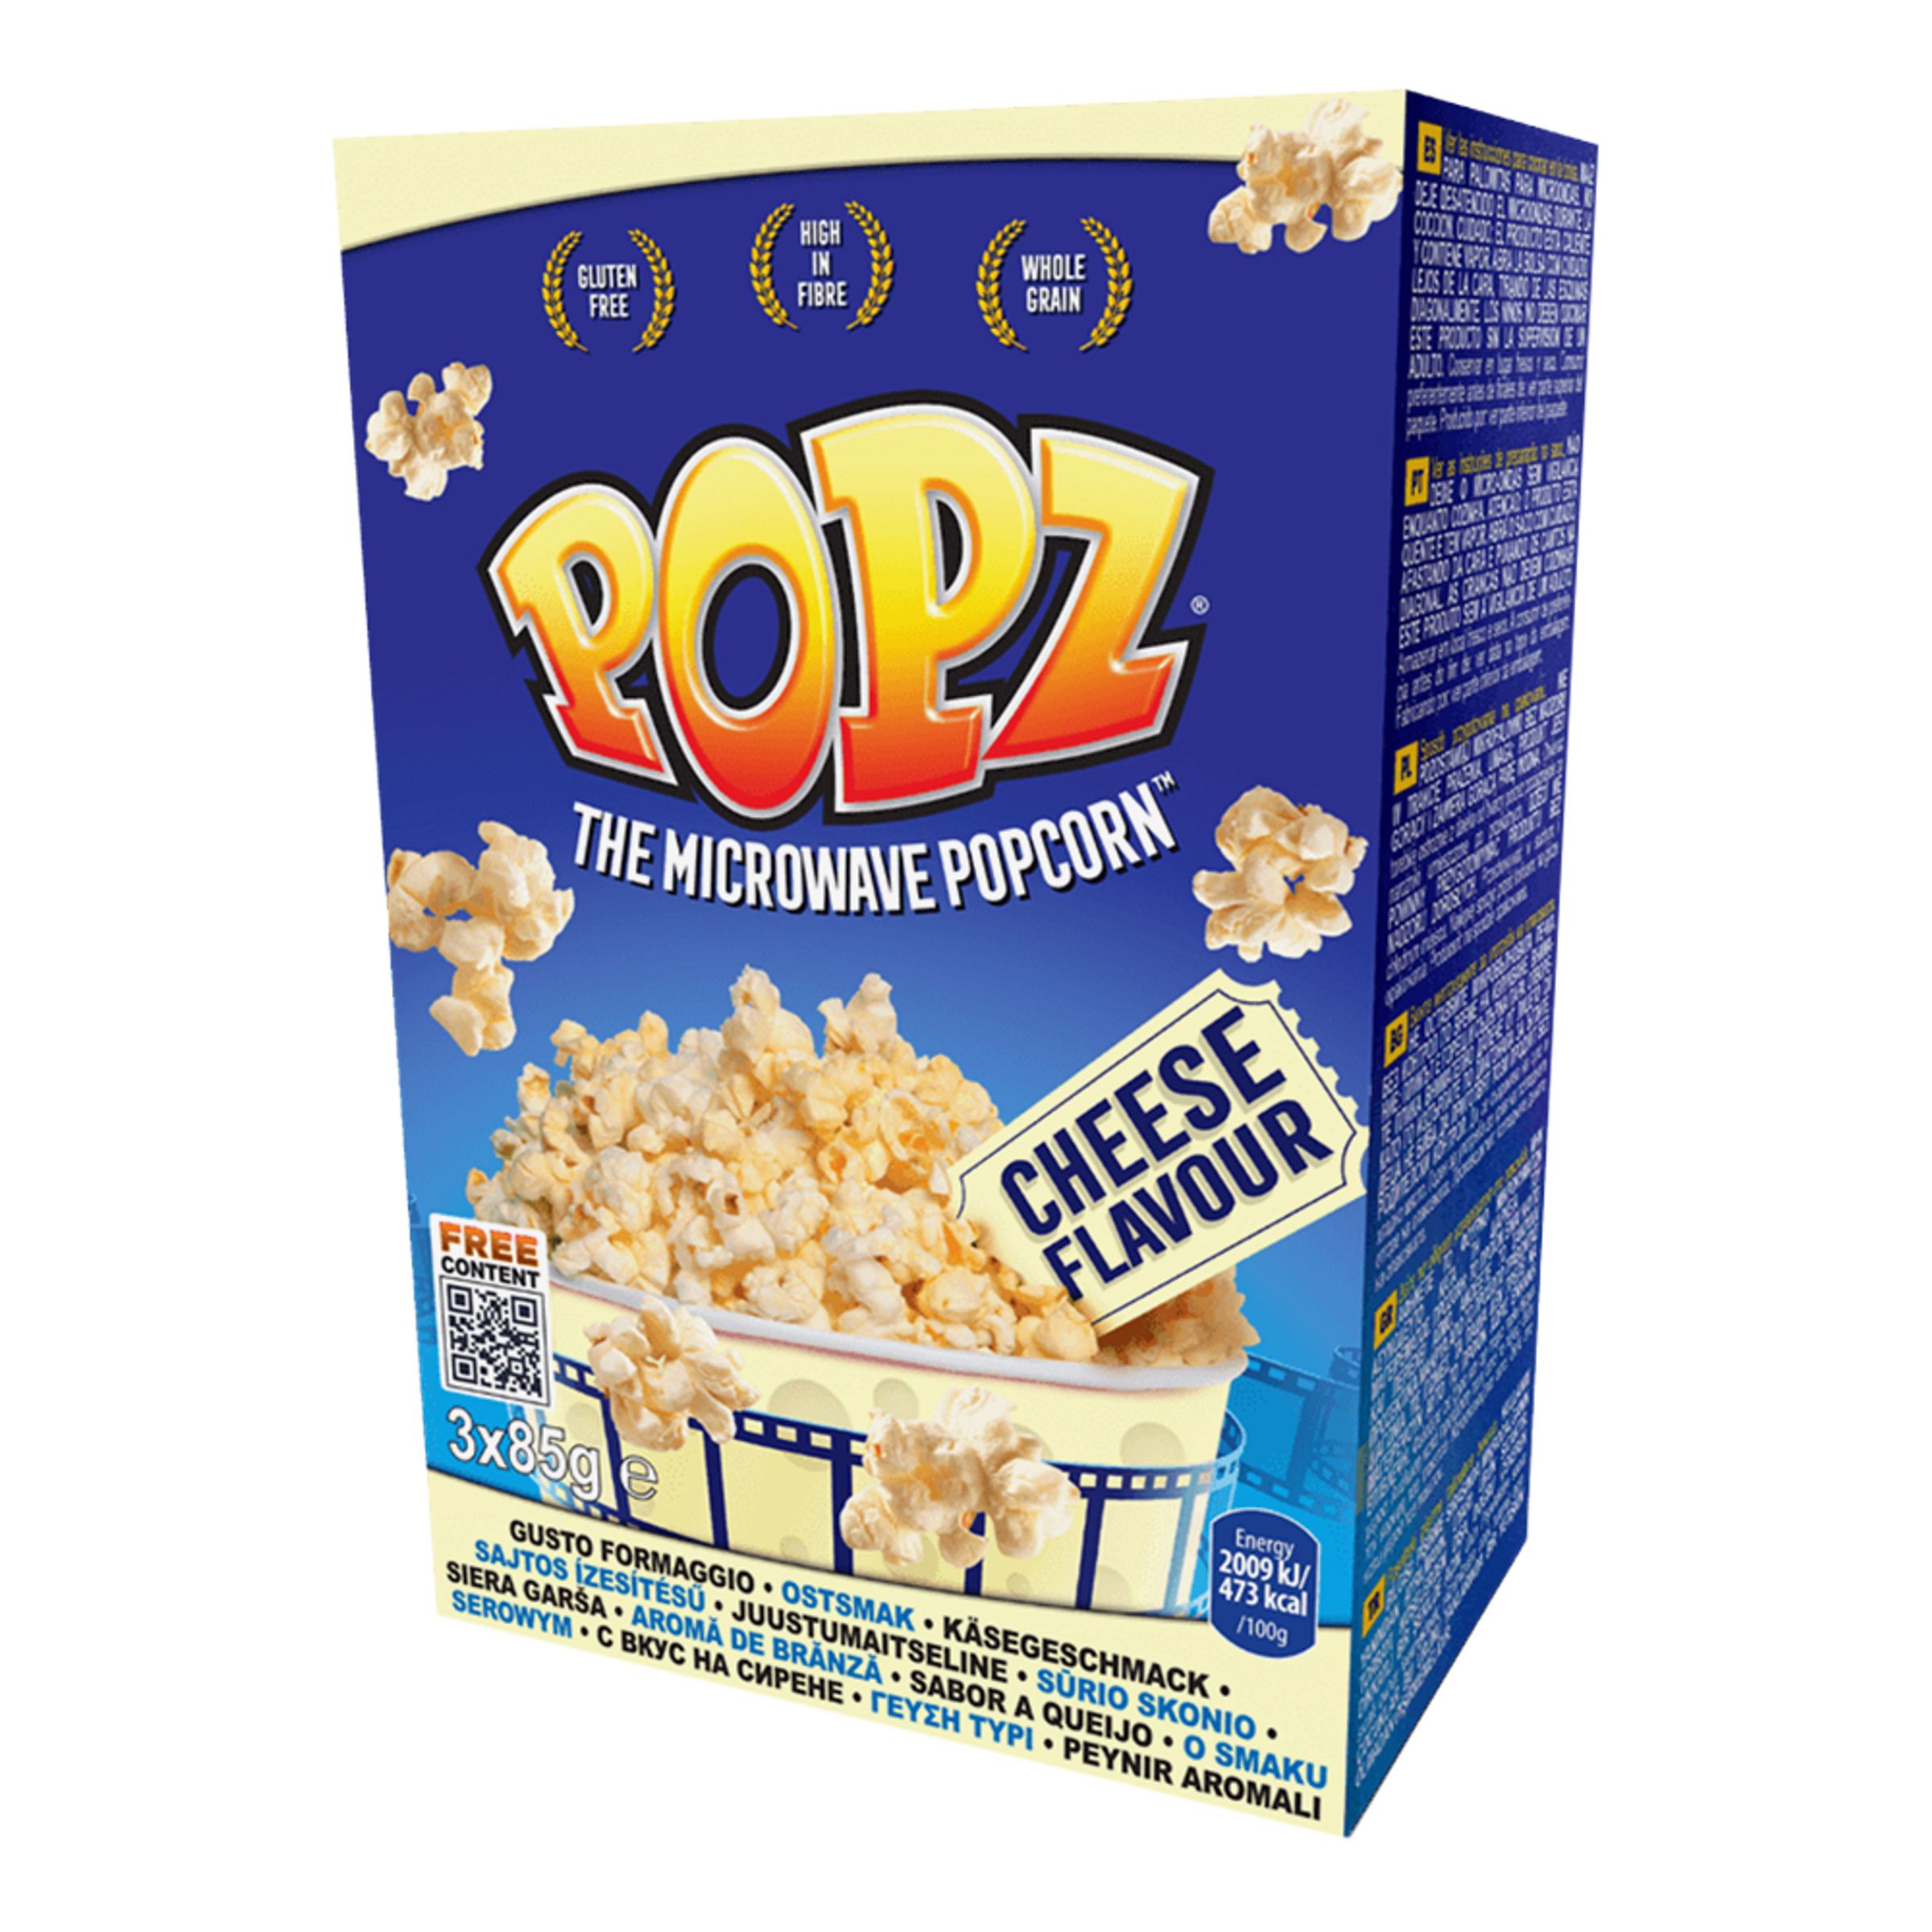 Popz Micropop Cheese